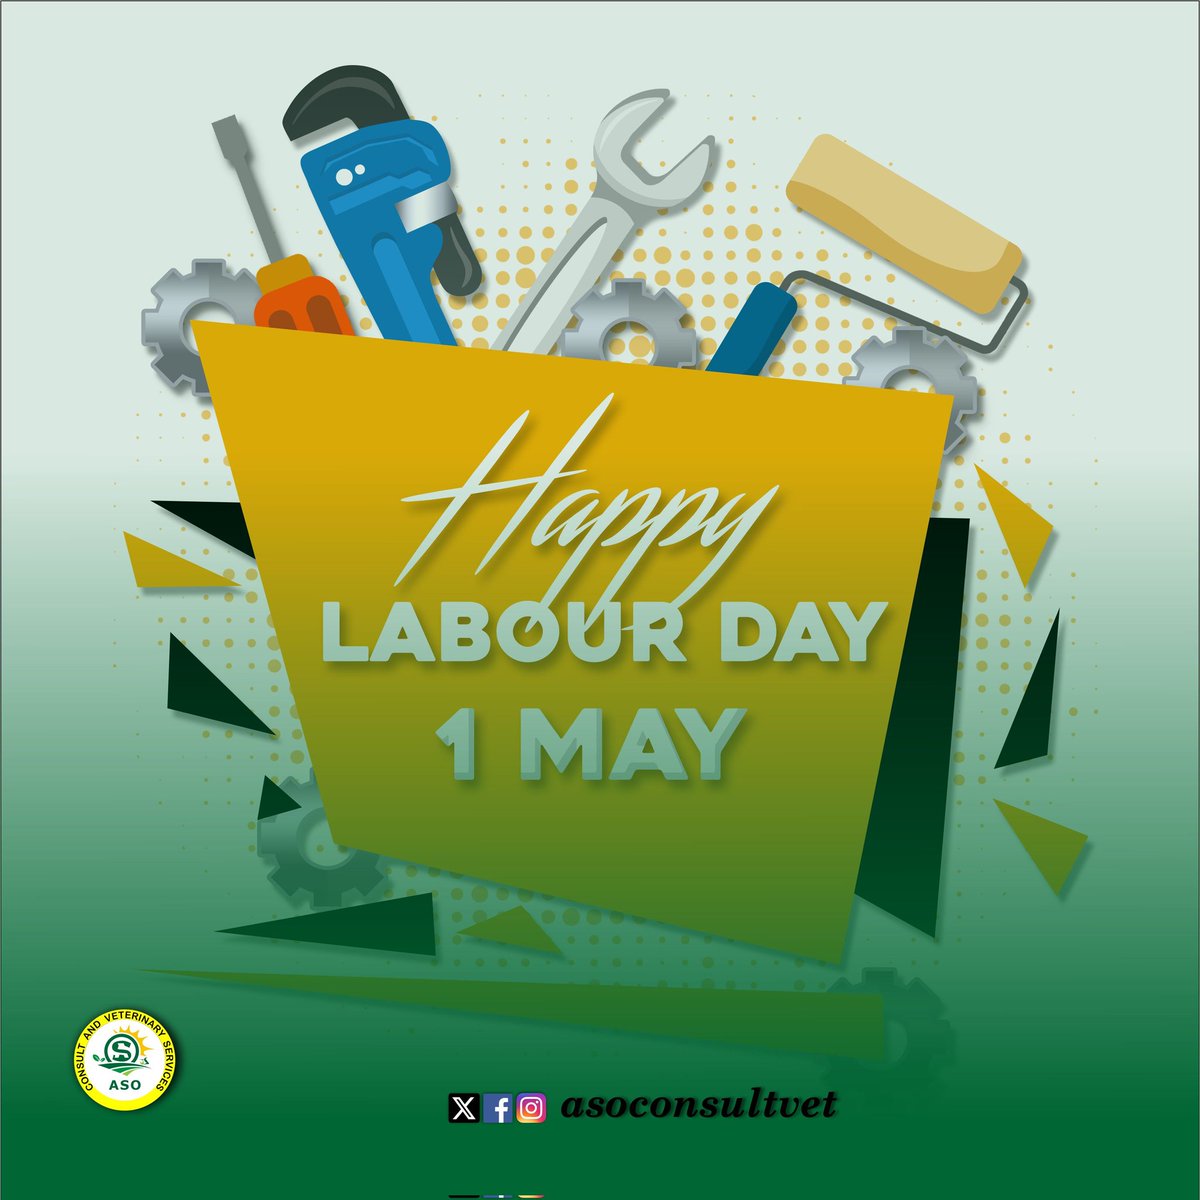 I'm wishing you a relaxing and fulfilling Labor Day, full of gratitude for all that you have done to make civilization possible. 
#LabourDay2024 #MayDay2024 #agriculture #agricultureandfarming #livestockfarming #livestock #agricbusiness #asoconsultvet #pig #pigfarming #pigfarmer